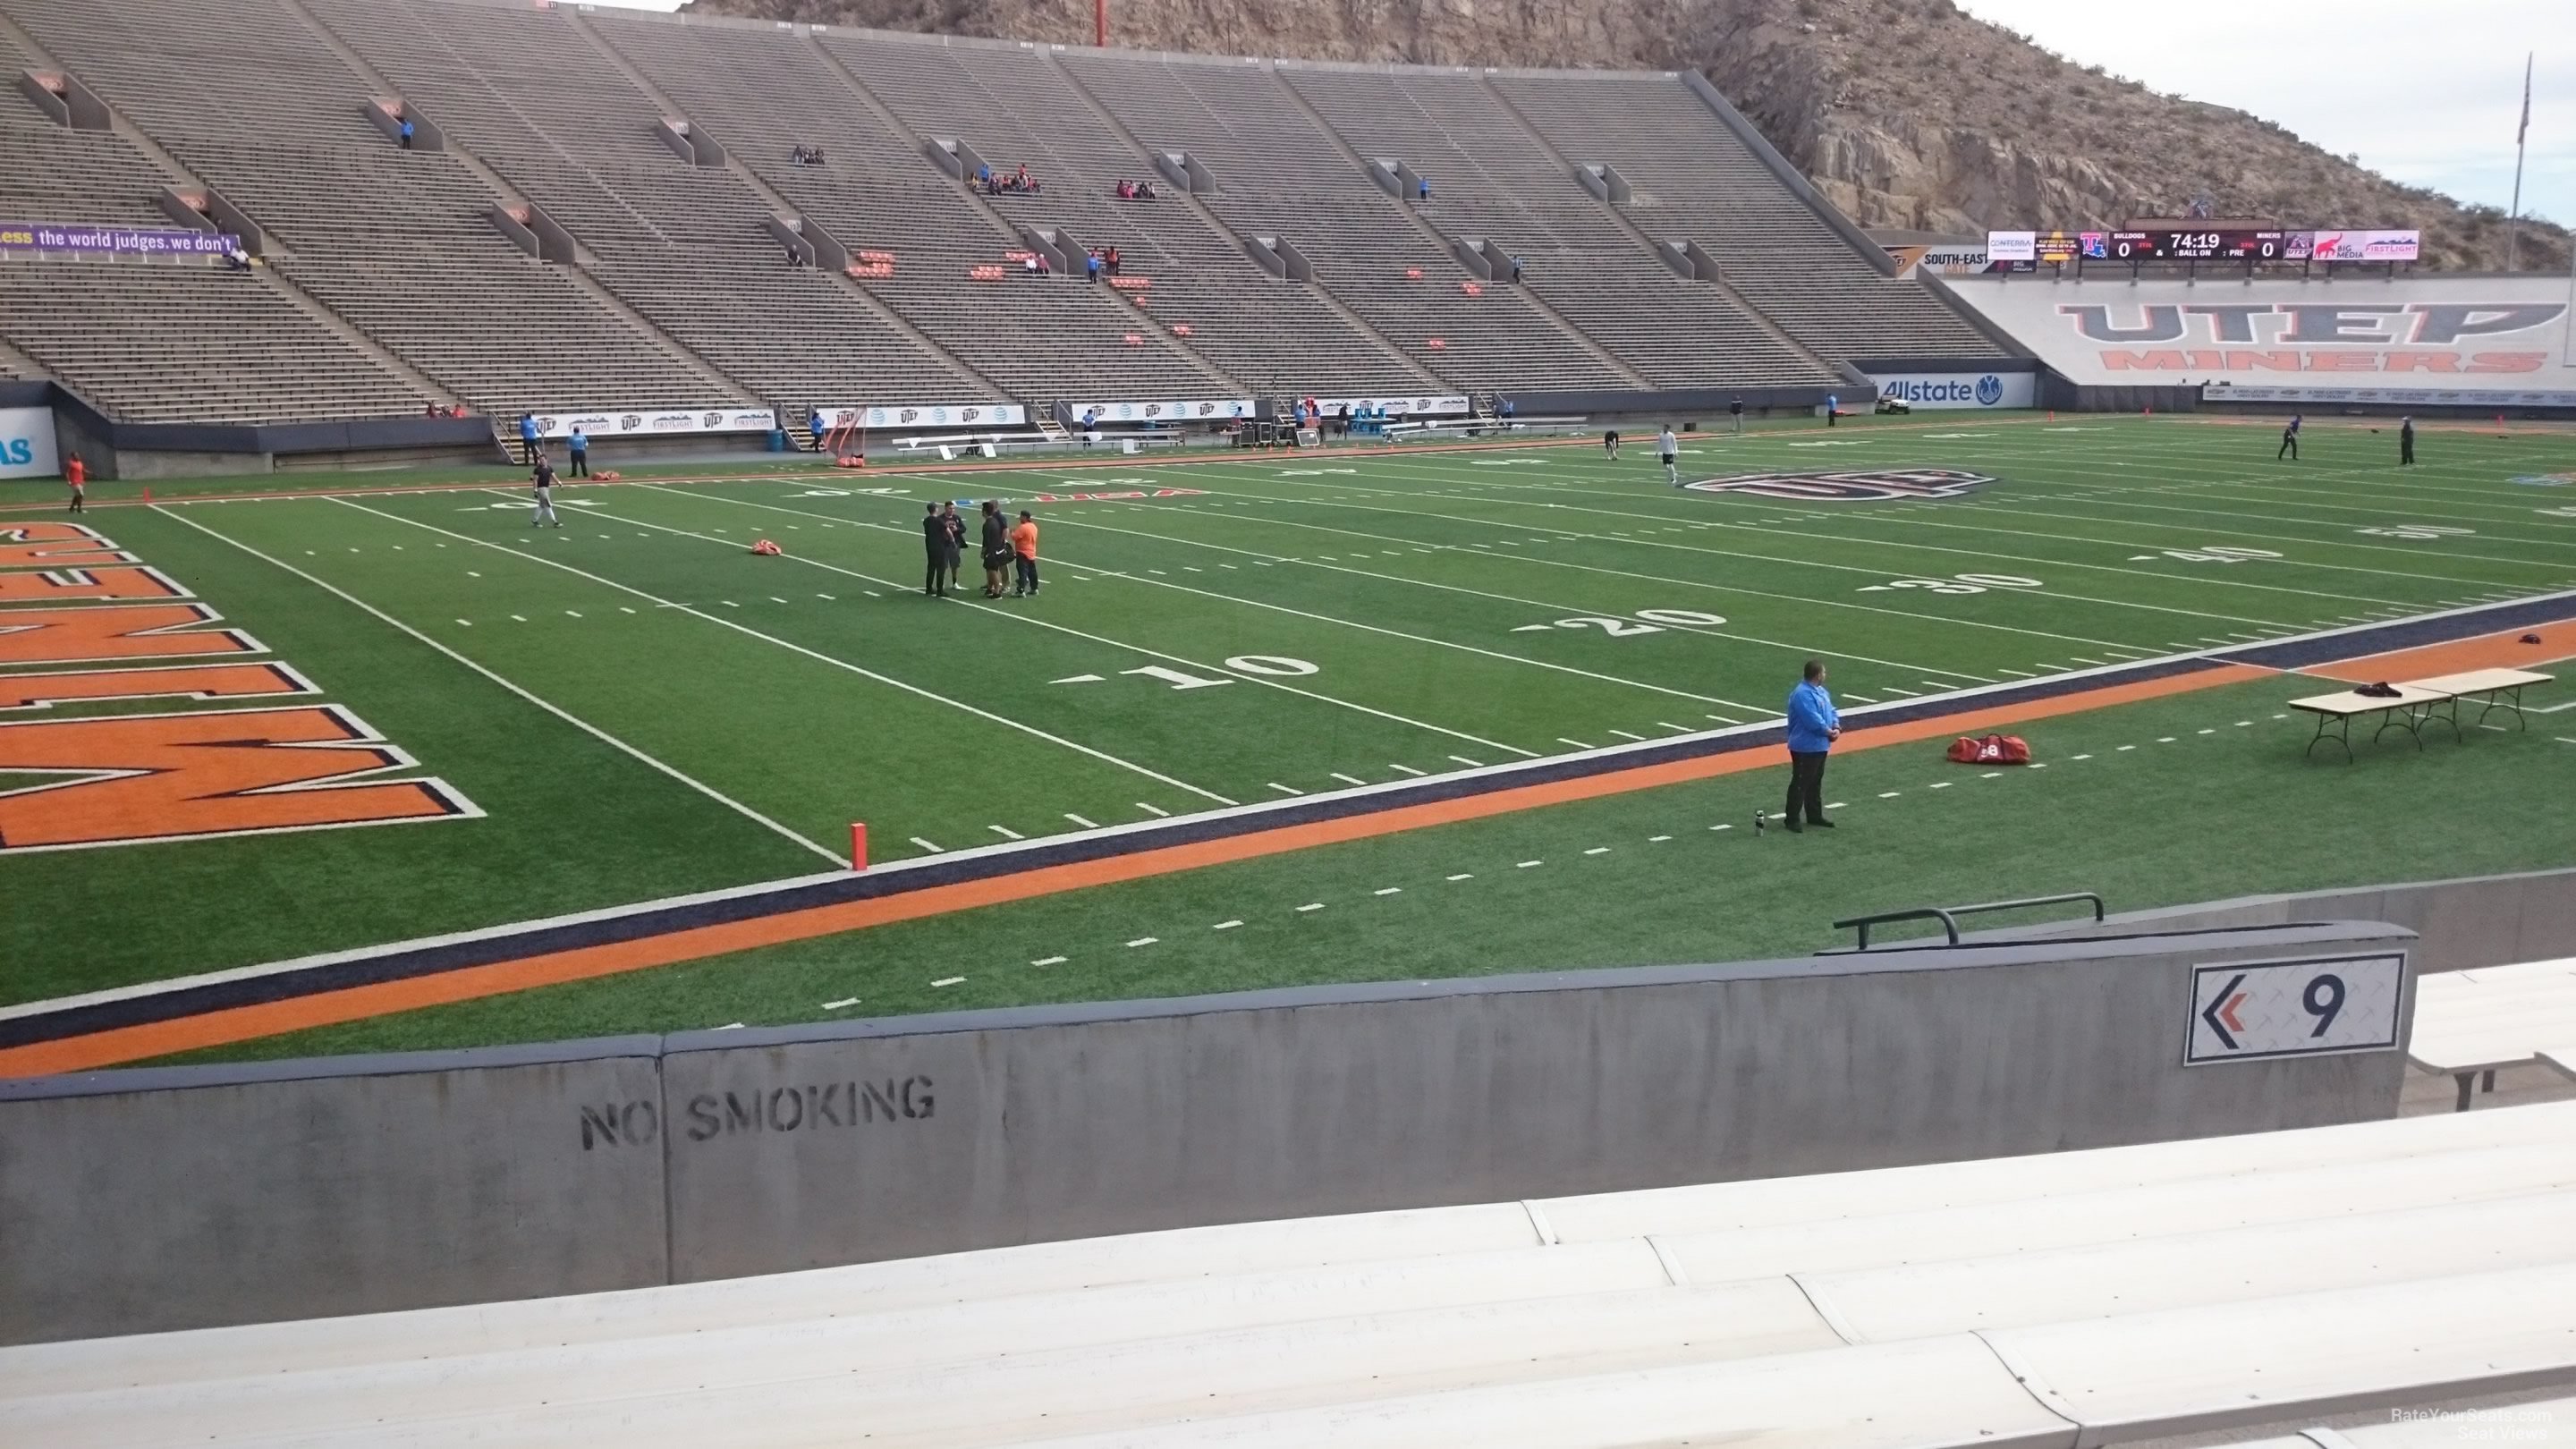 section 9, row 15 seat view  for football - sun bowl